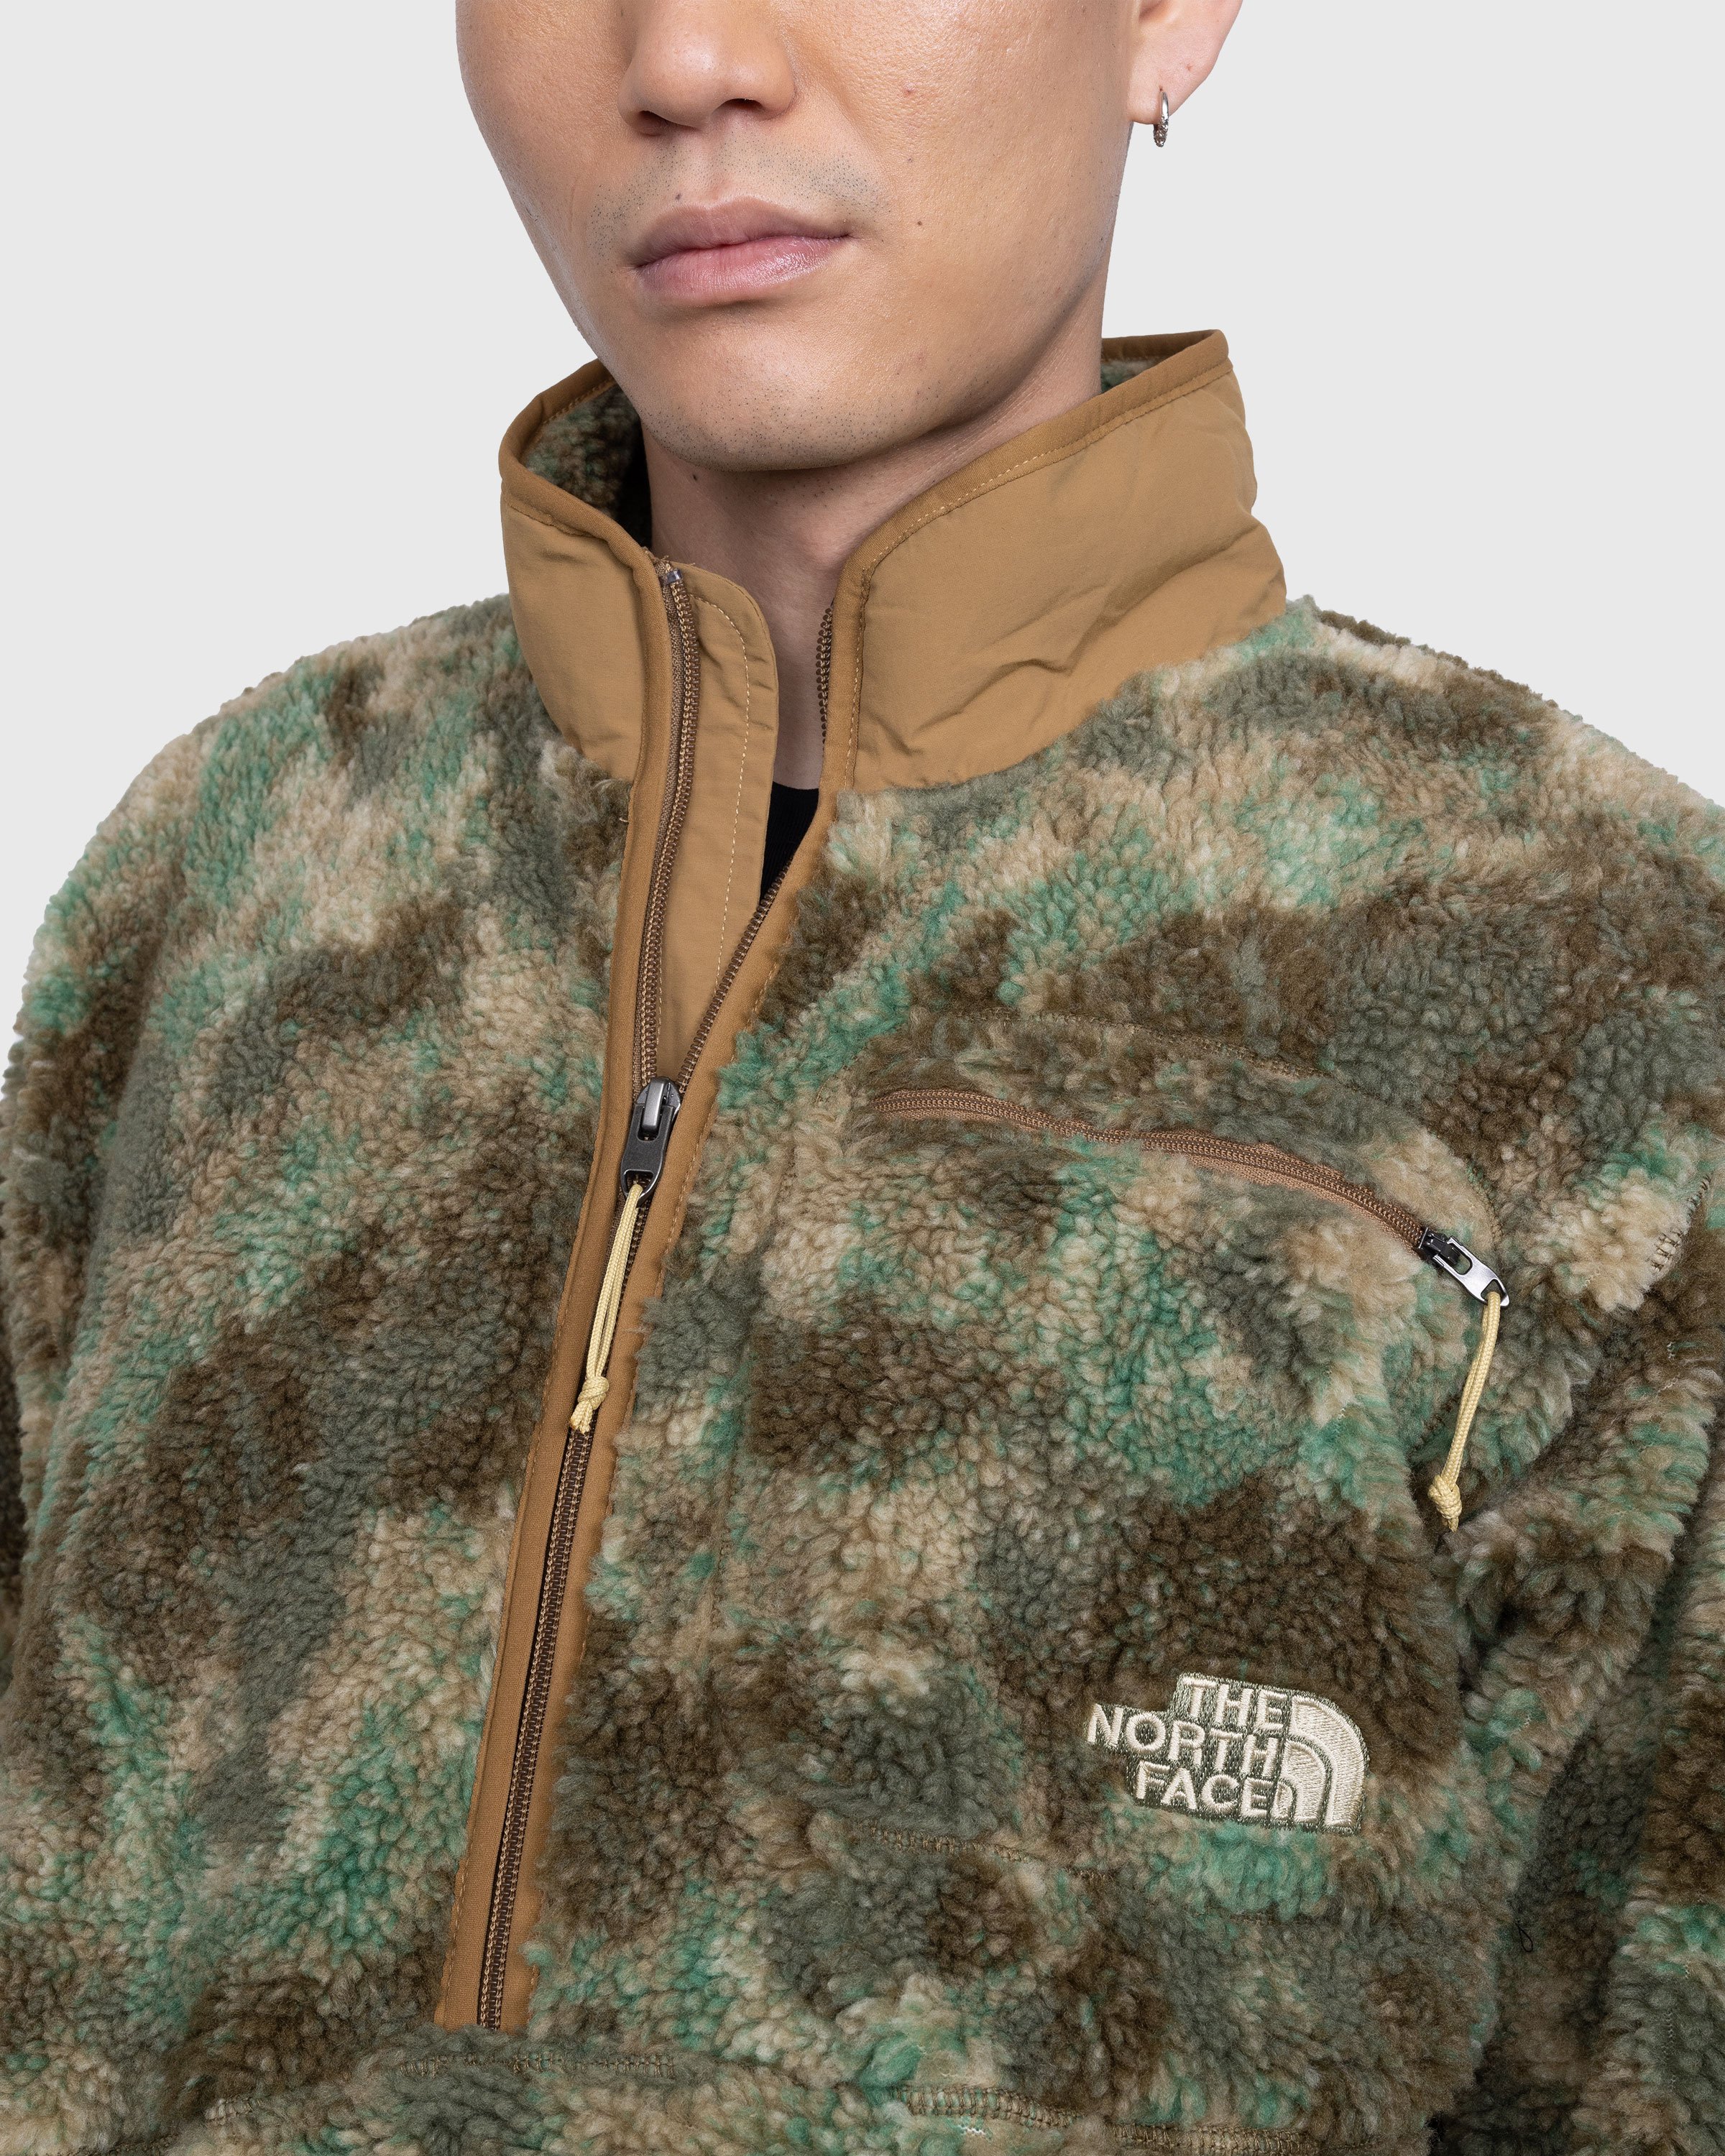 The North Face - Extreme Pile Pullover Military Olive/Stippled Camo Print - Clothing - Green - Image 4